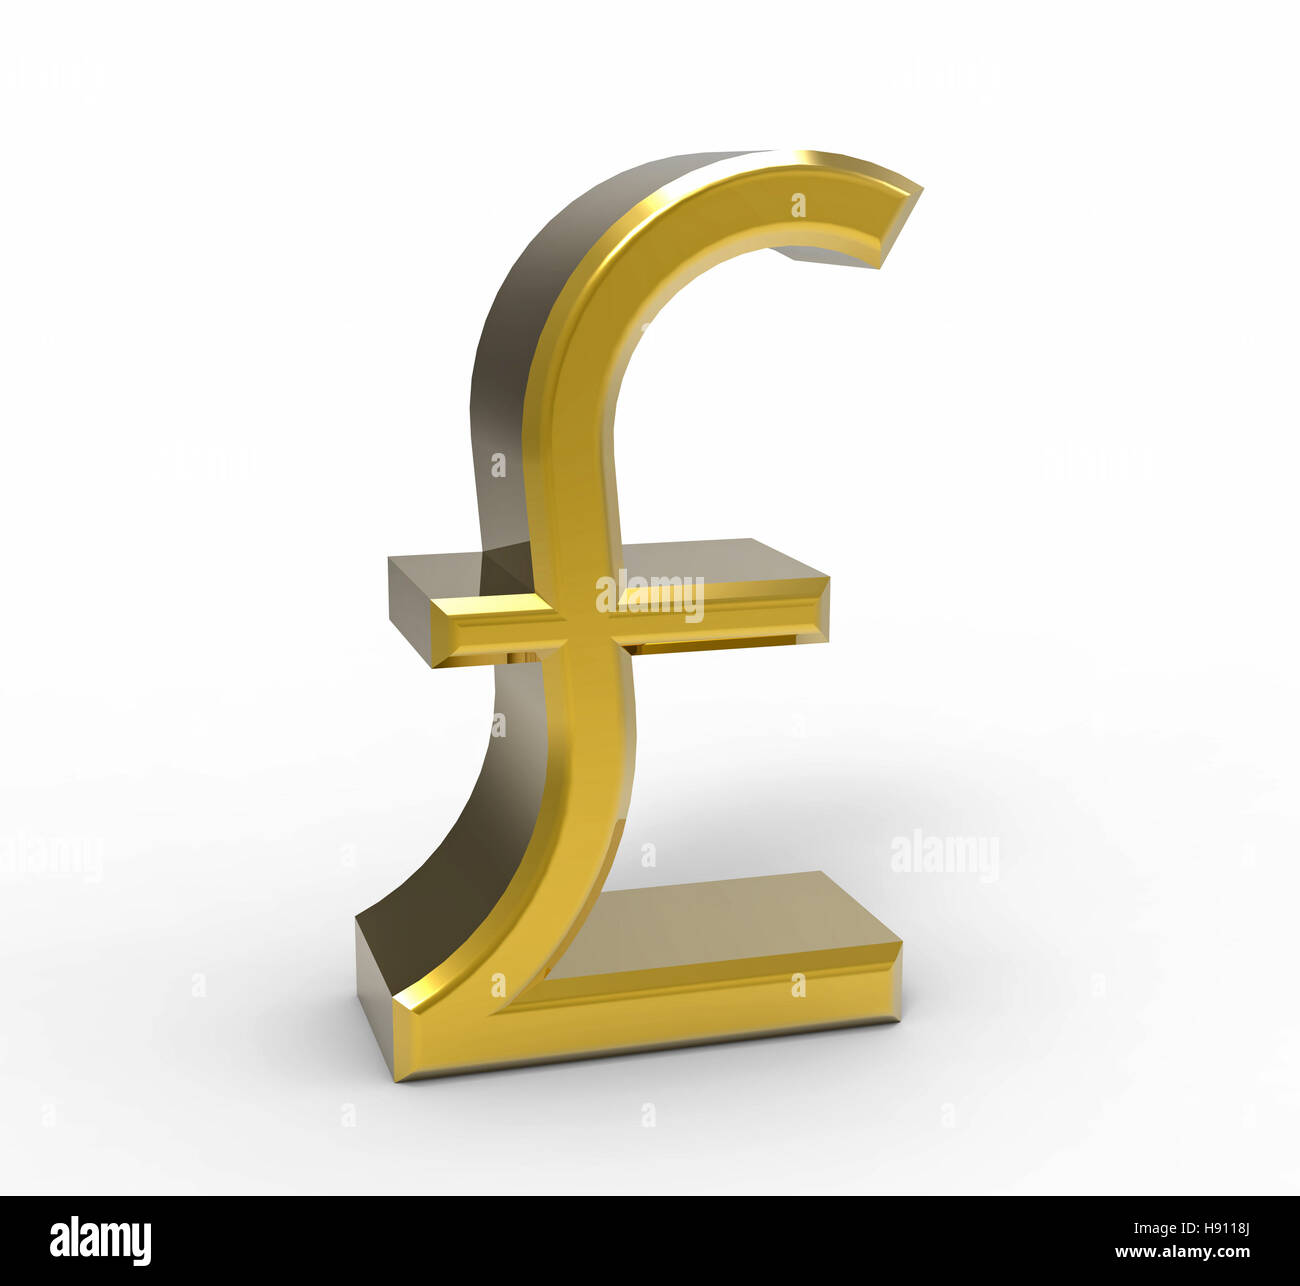 Symbol of the pound sterling, UK currency, 3D rendering Stock Photo